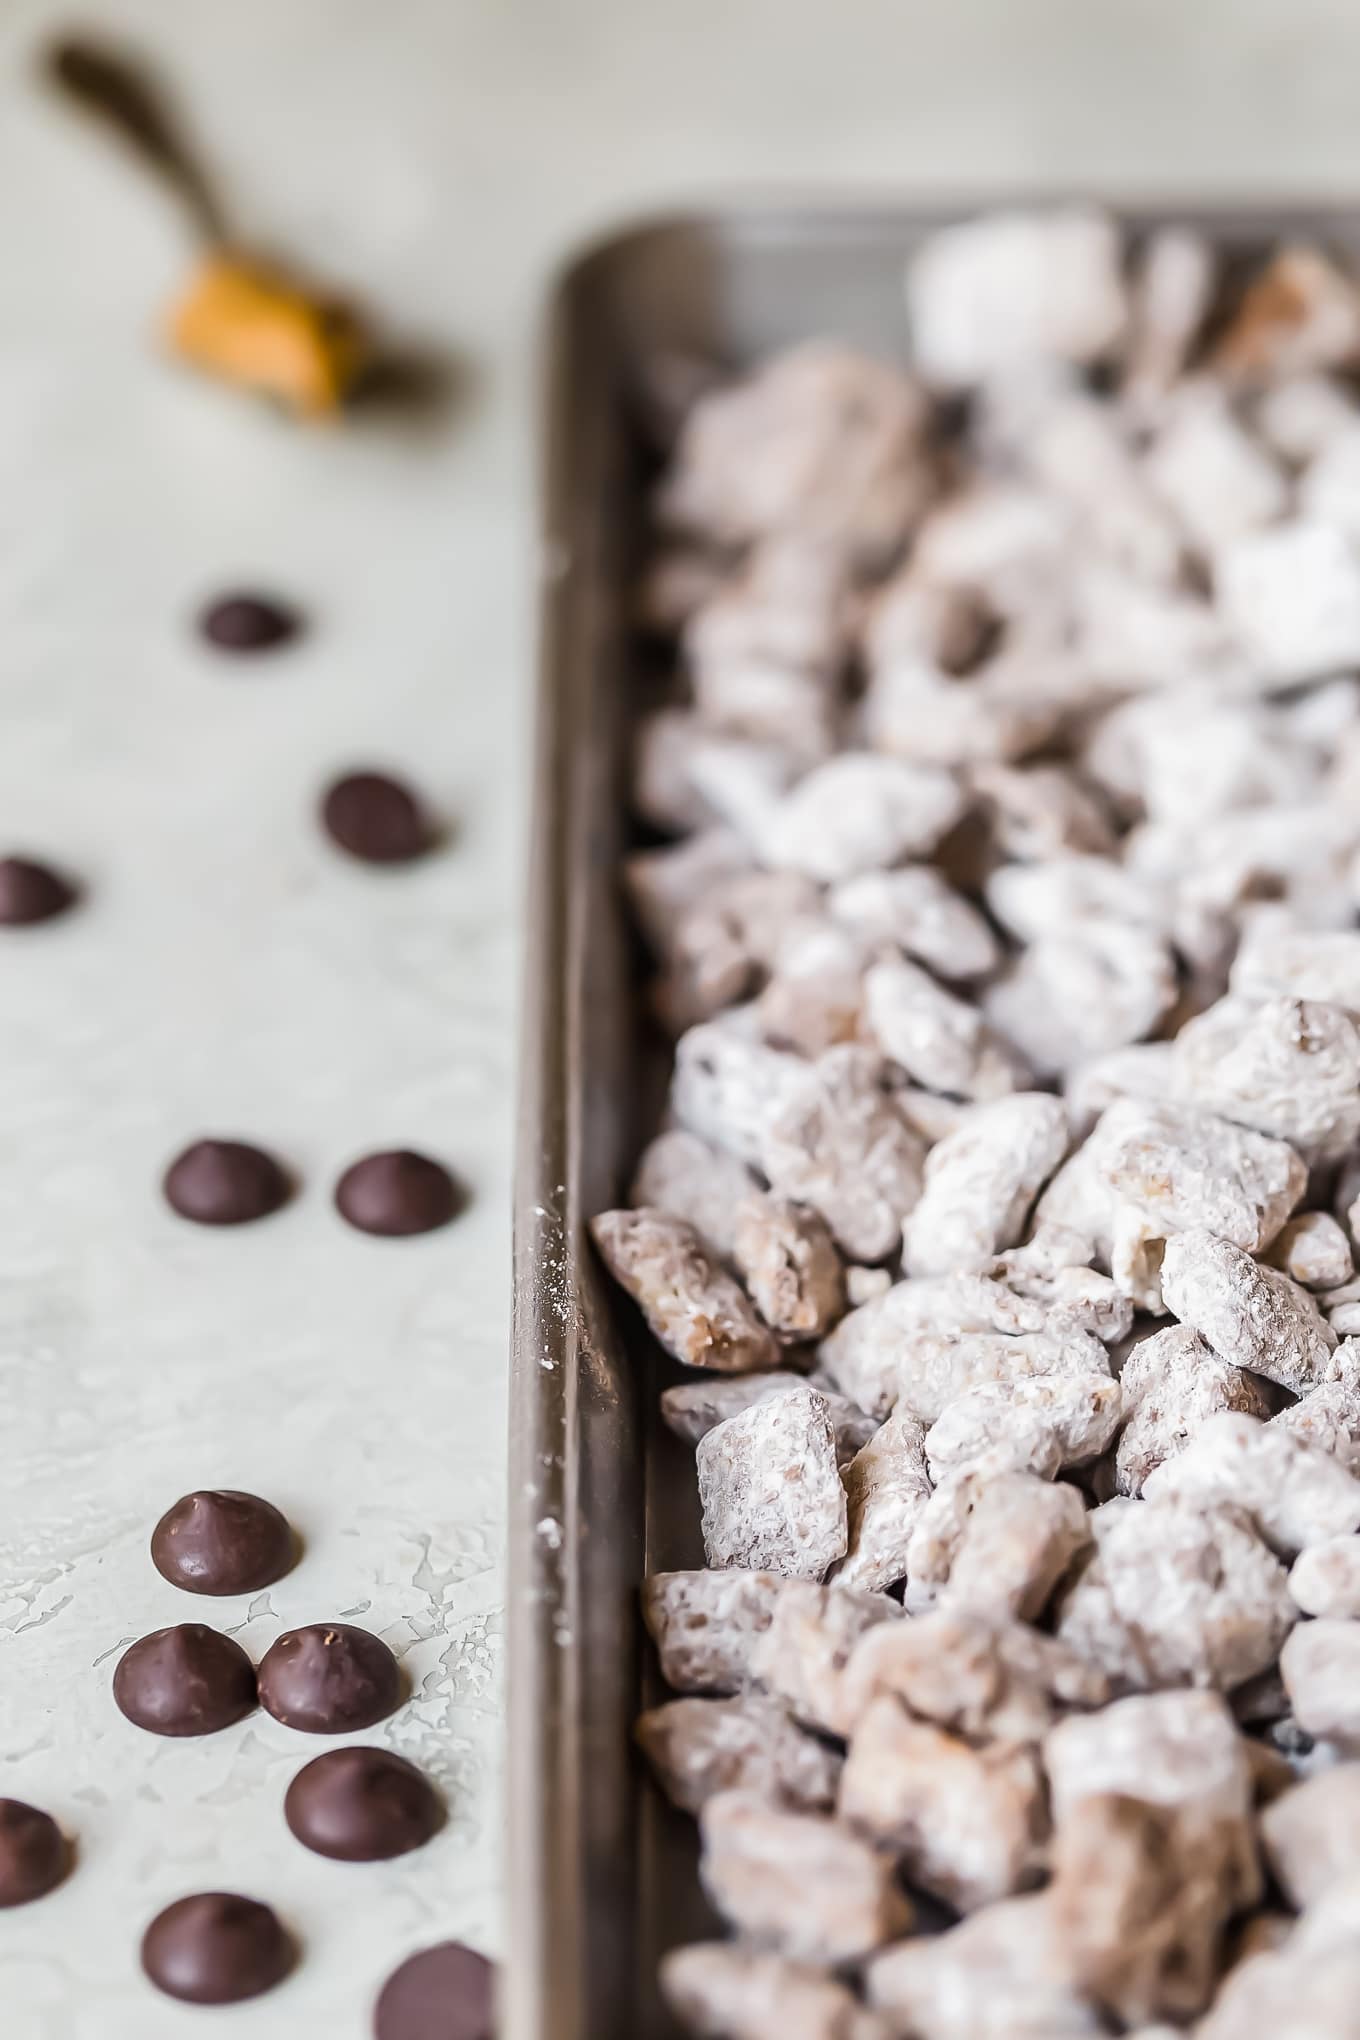 puppy chow on a baking tray with some chocolate chips next to the tray